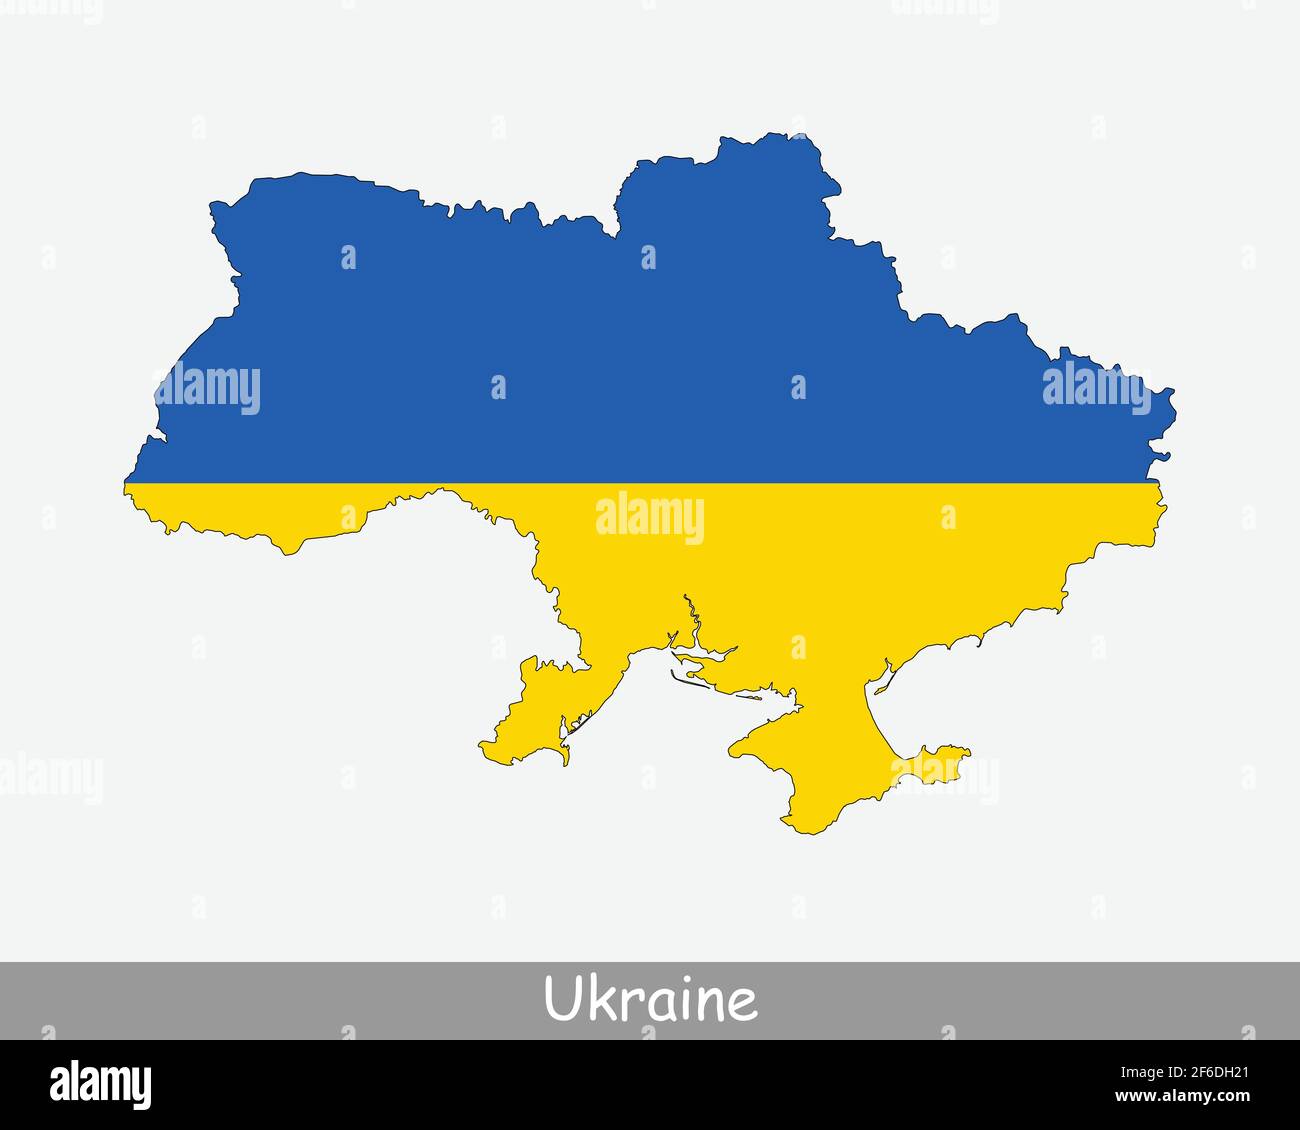 Ukraine Flag Map. Map of Ukraine with the Ukrainian national flag isolated on a white background. Vector Illustration. Stock Vector